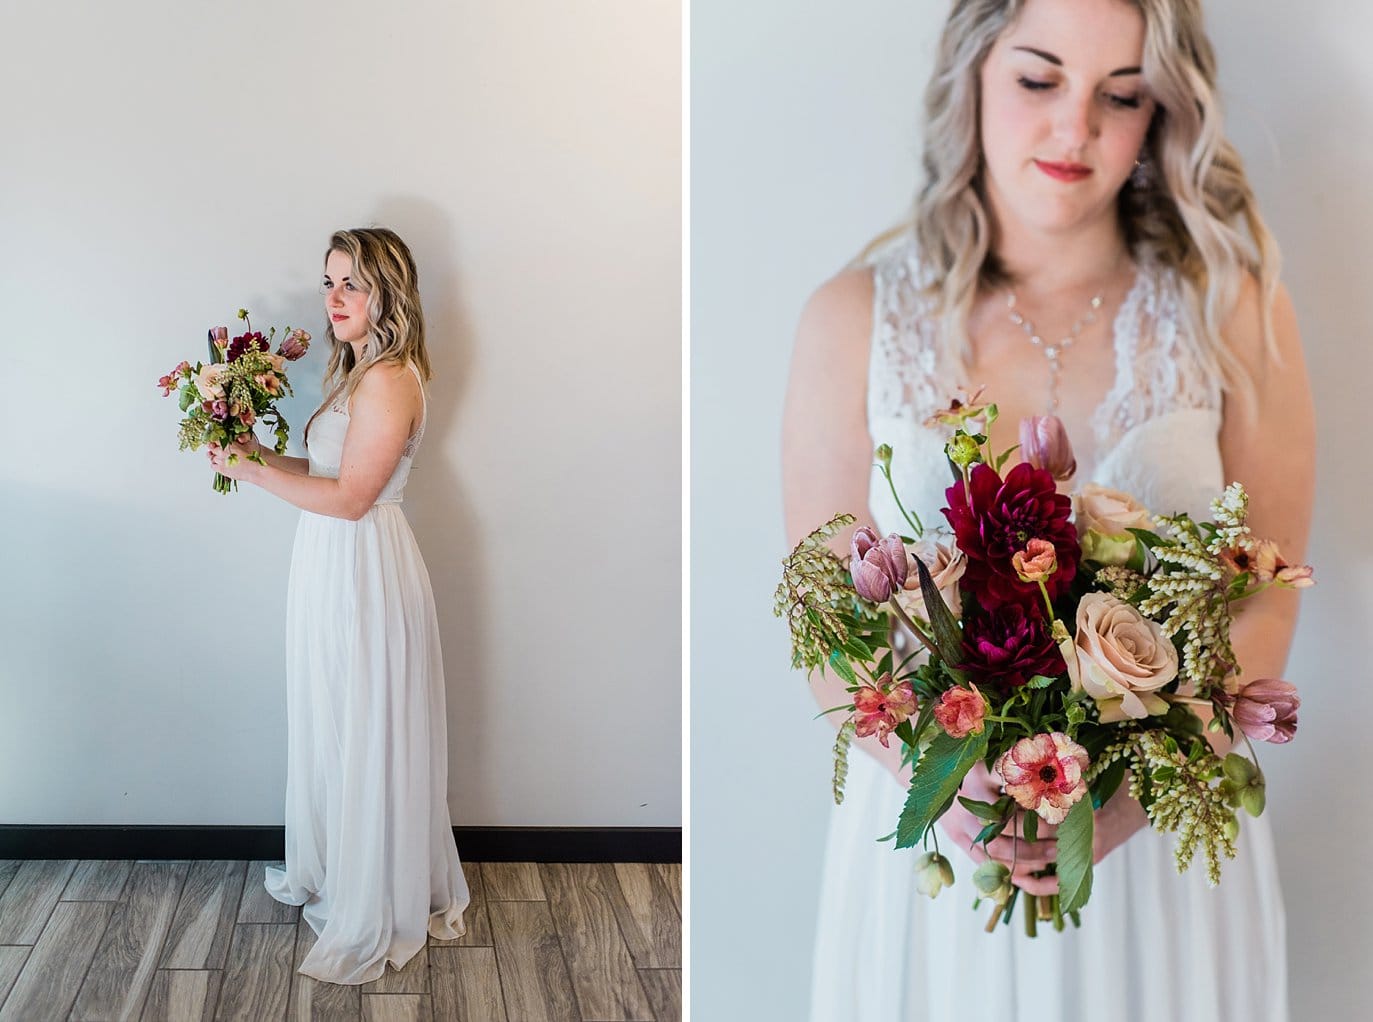 bride with simple lace dress and merlot bridal bouquet at Northgate Event Center wedding by Northglen wedding photographer Jennie Crate